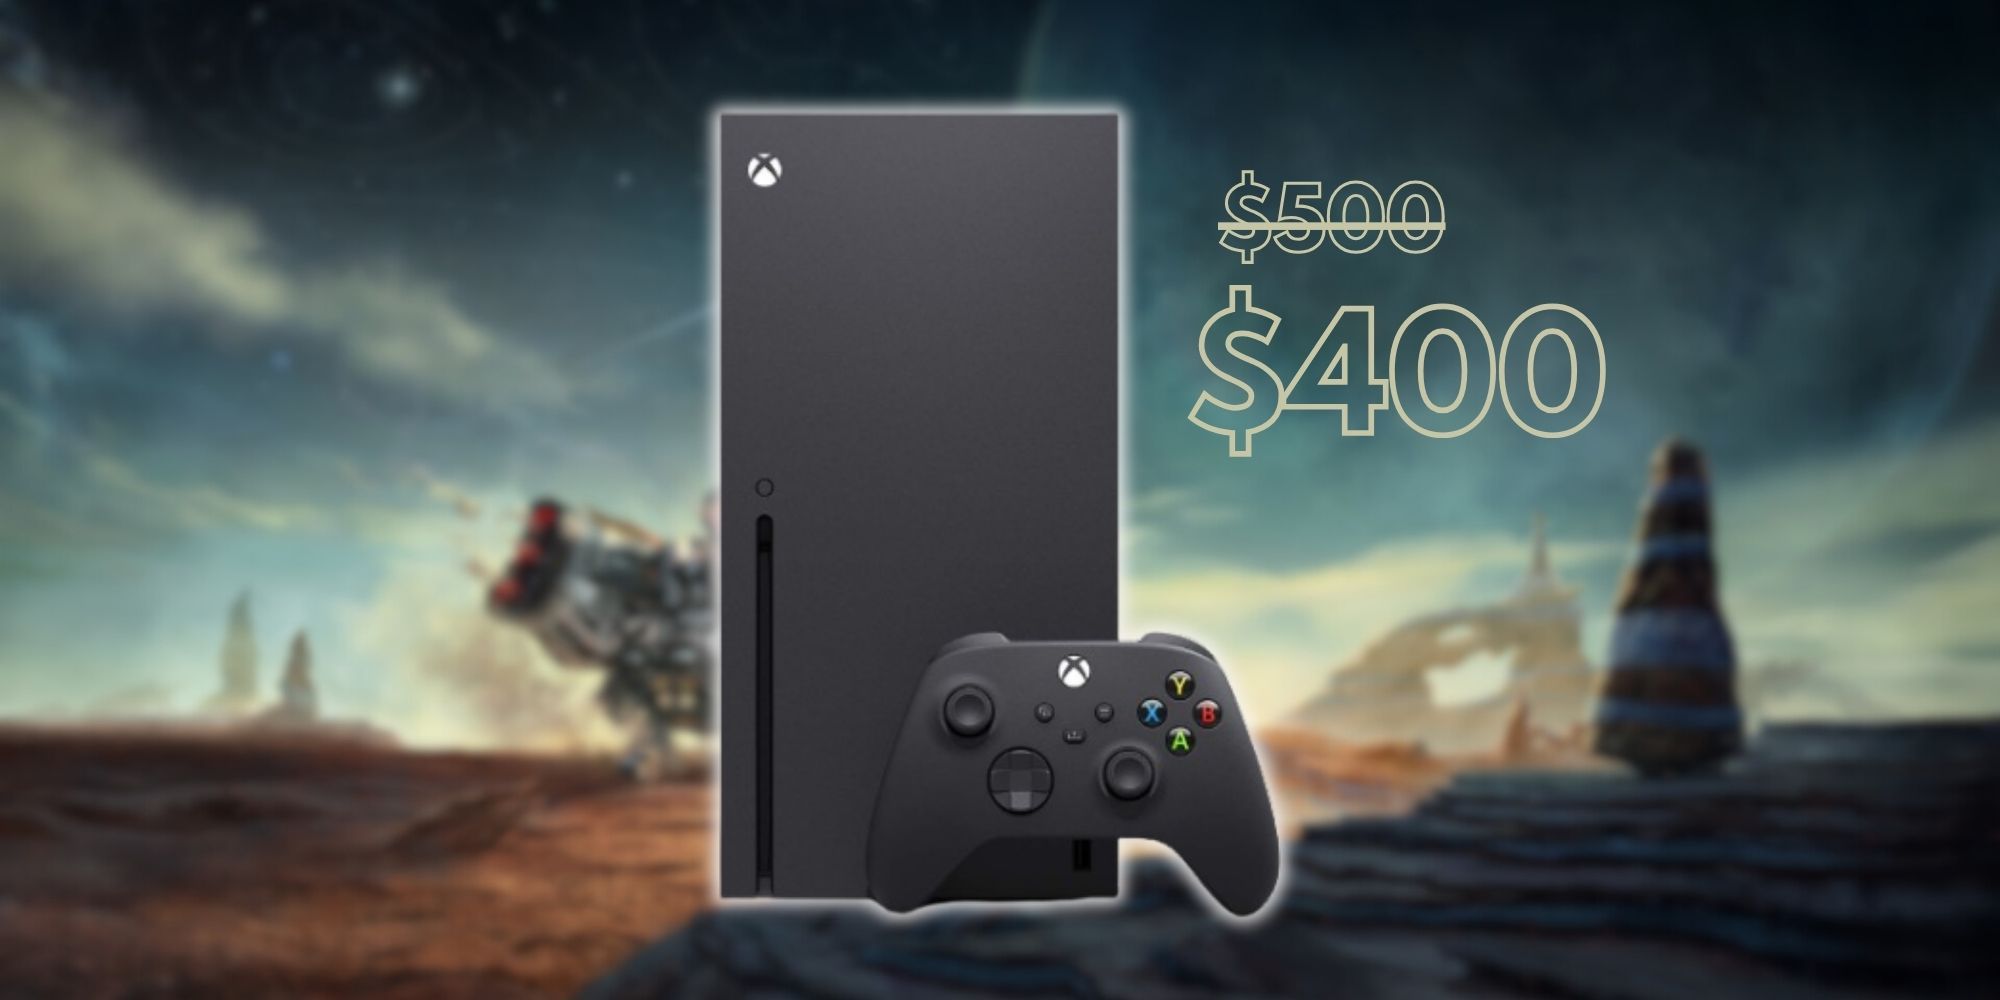 Blurred Starfield banner with a product image of the Xbox Series X console and controller with a price cut text box